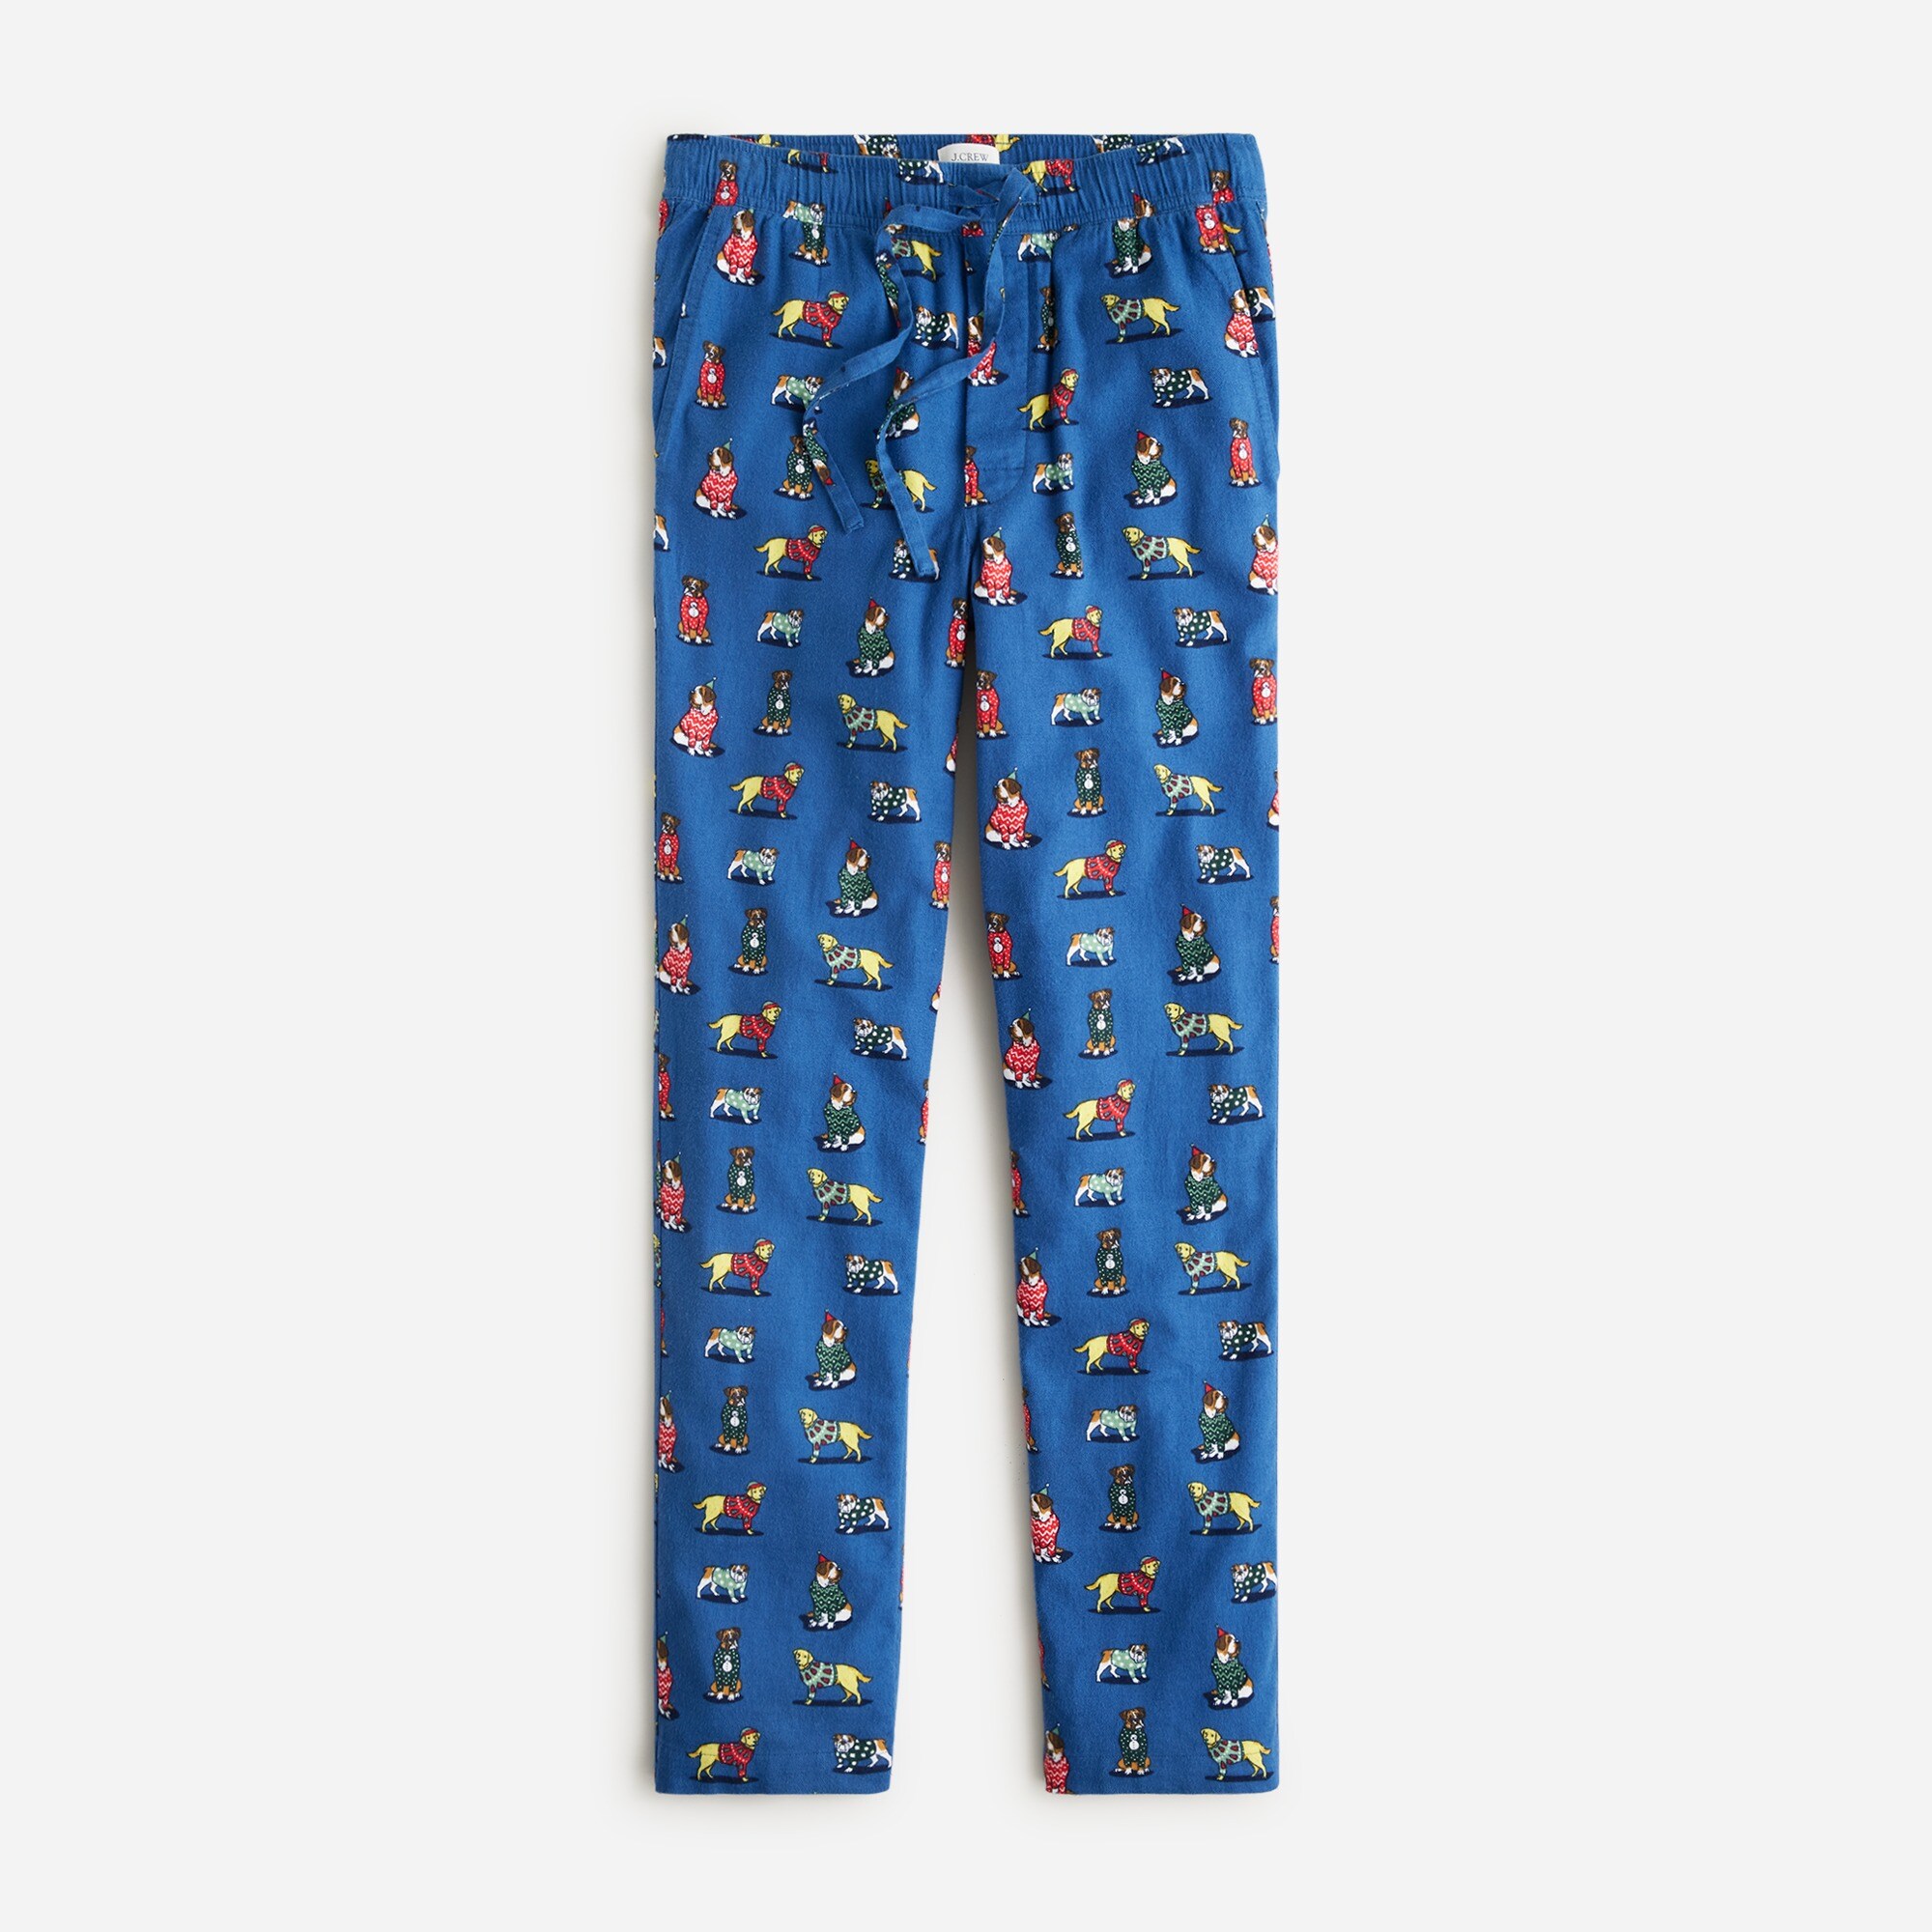  Flannel pajama pant in print